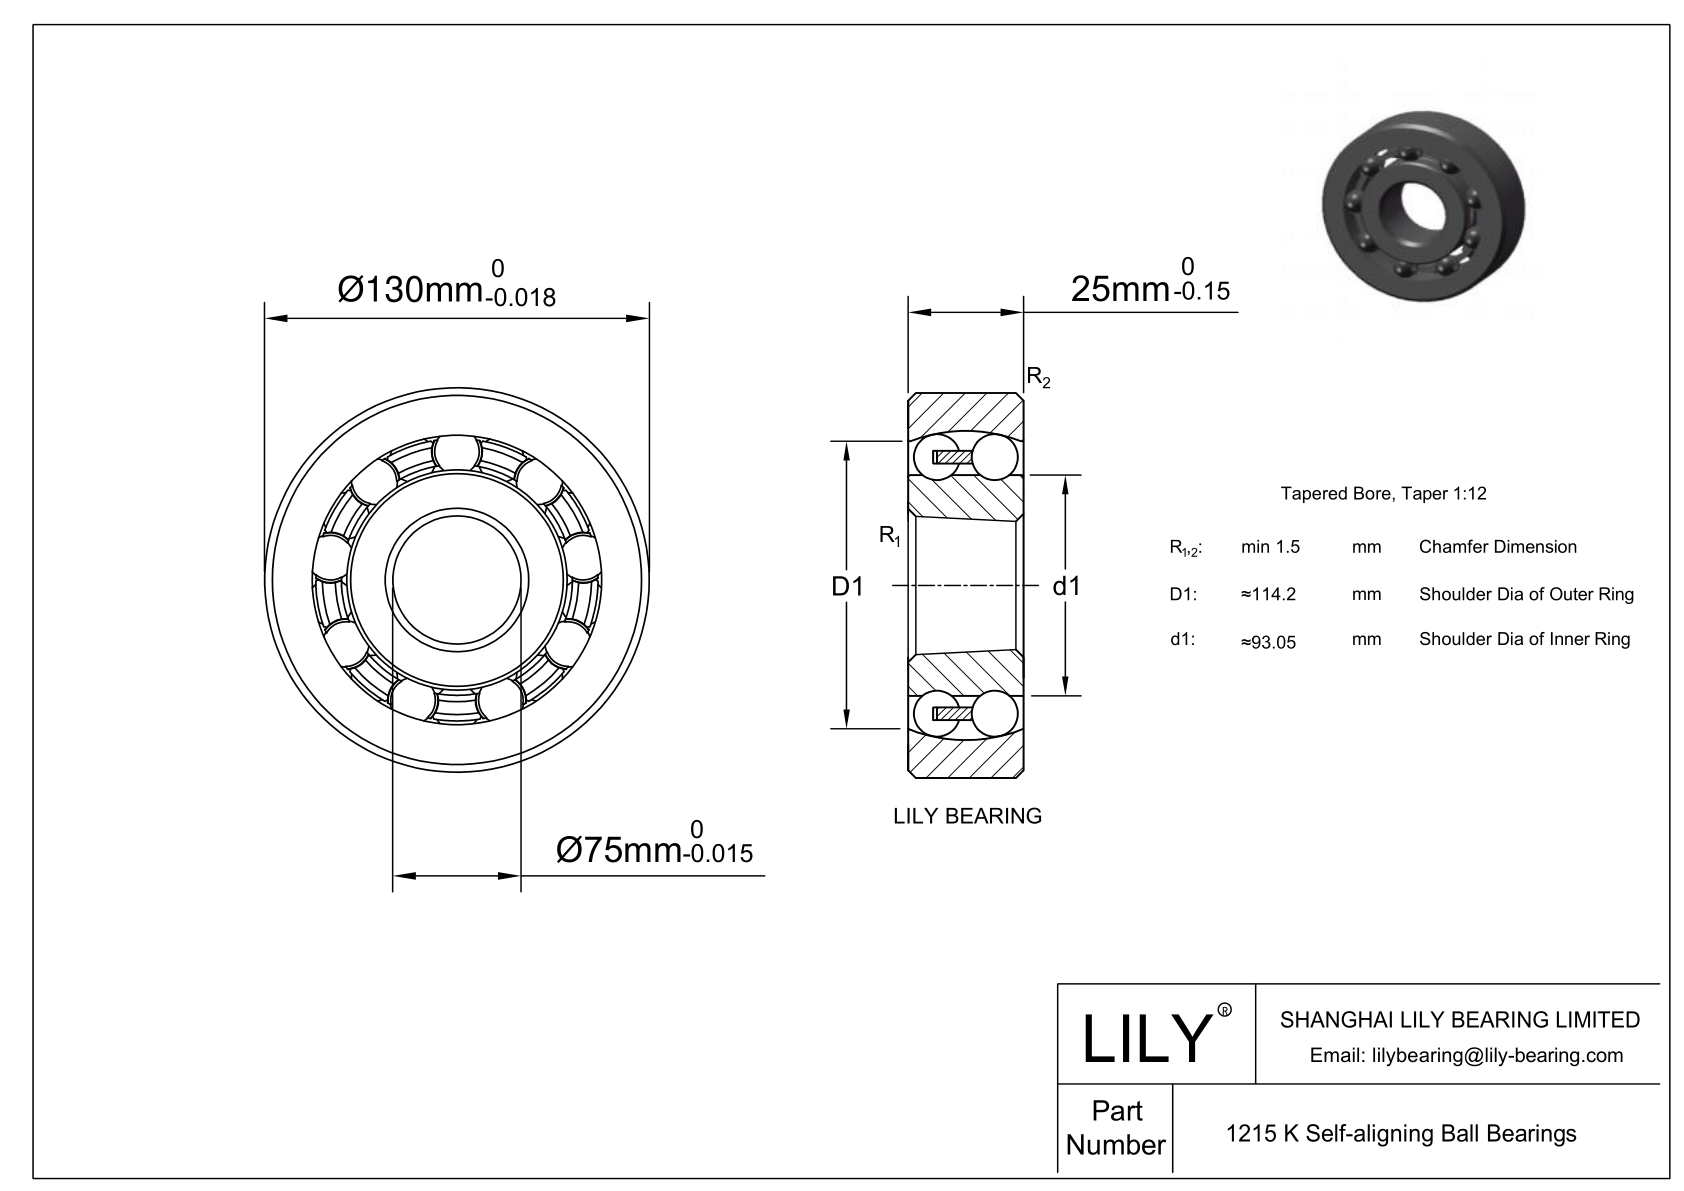 S1215 K Stainless Steel Self Aligning Ball Bearings cad drawing